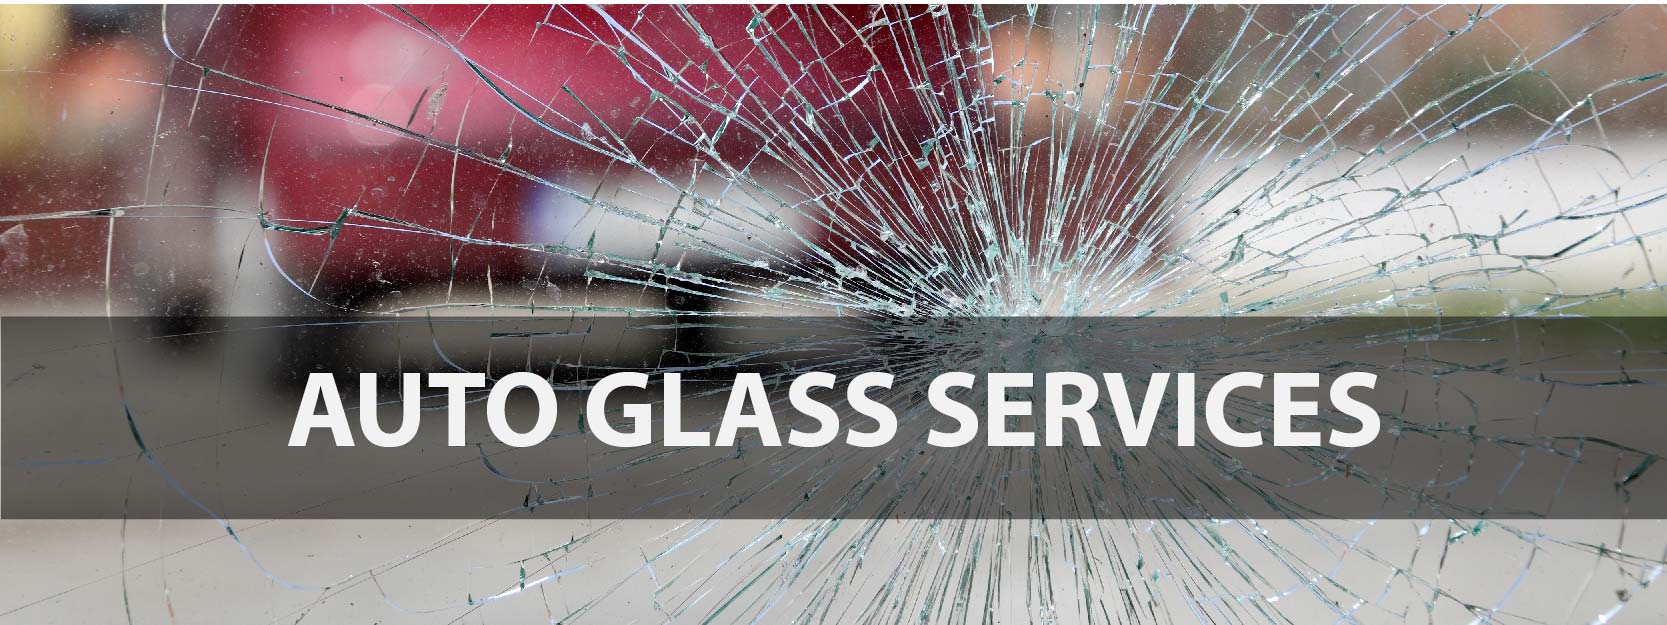 Windshield Repair & Replacement St. Louis, MO Metro Area-Bone Auto Glass Installers